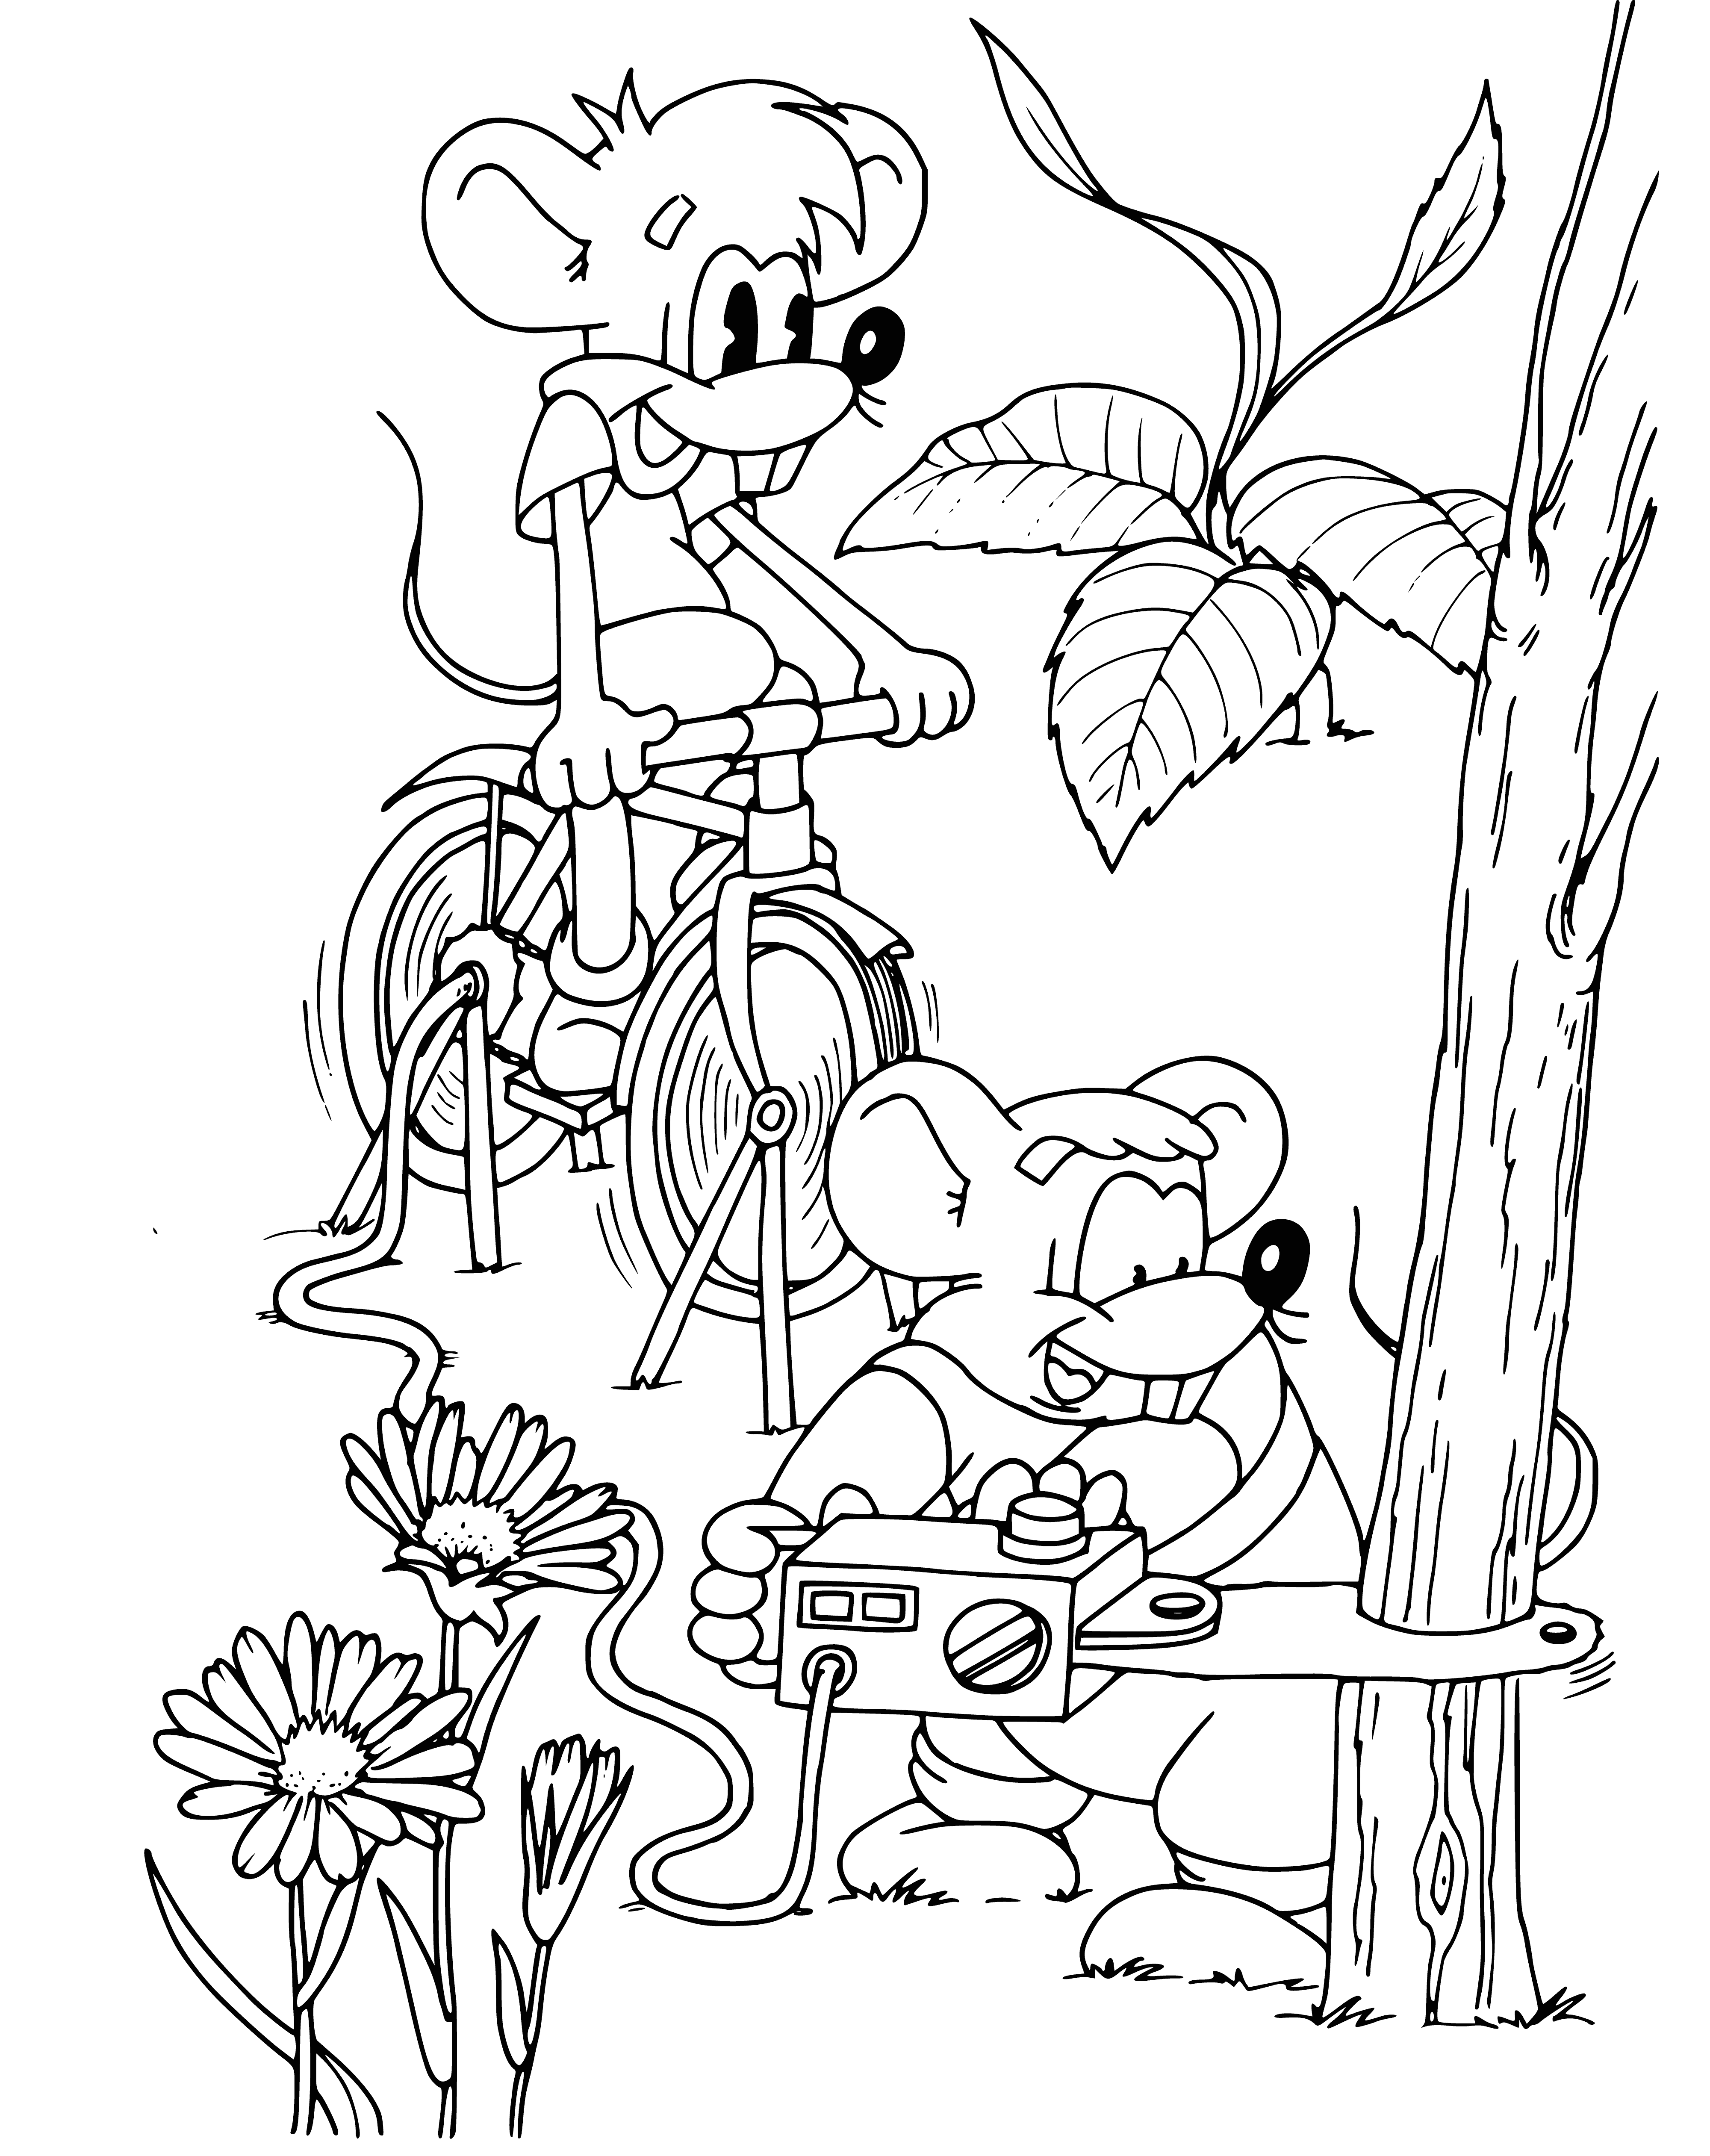 coloring page: Cat stands on checkered floor, 3 mice beg for food; orange fish in bowl gasps for air.